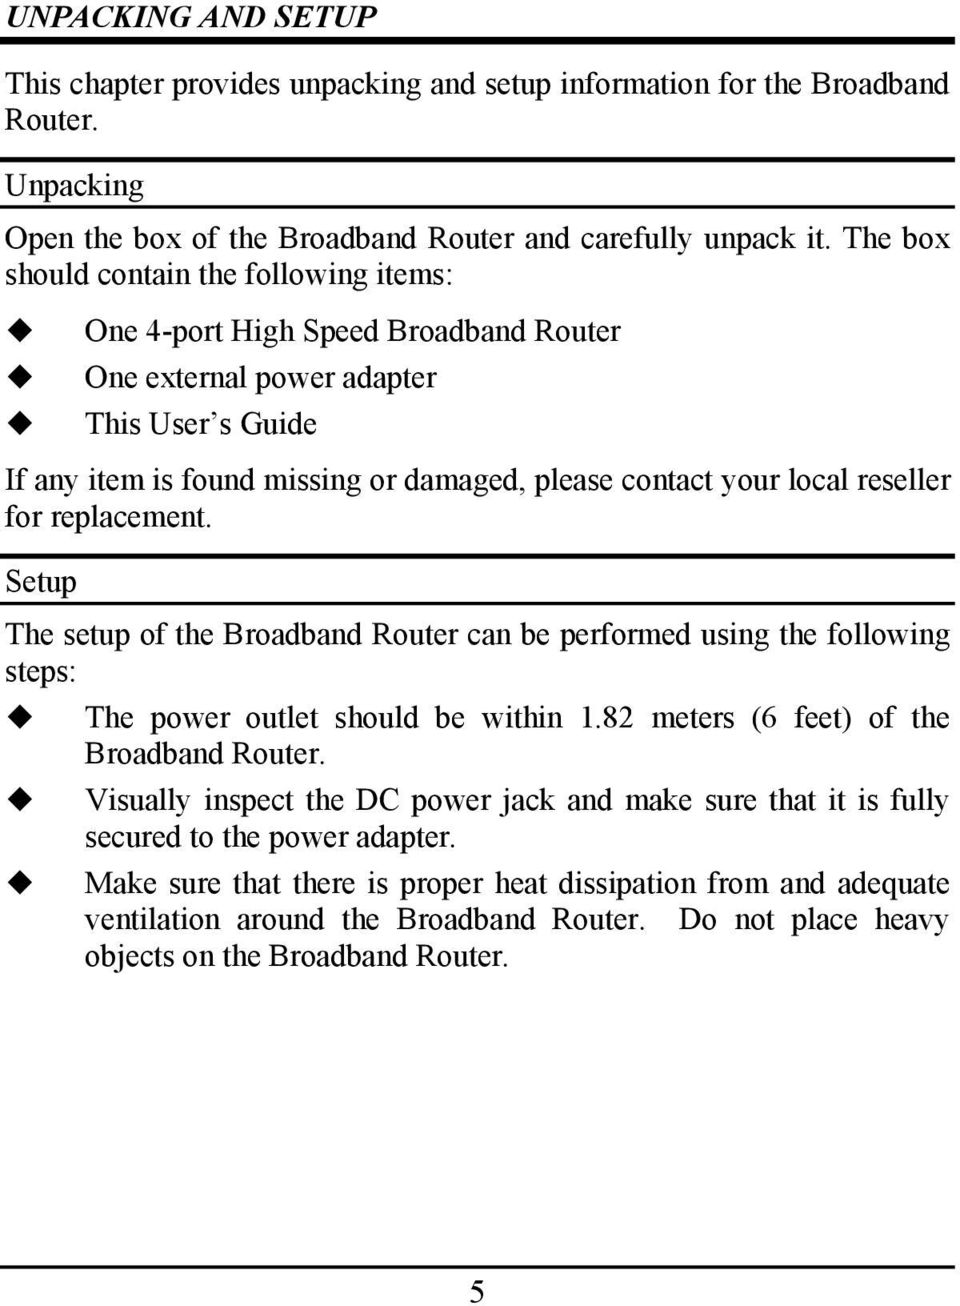 reseller for replacement. Setup The setup of the Broadband Router can be performed using the following steps: The power outlet should be within 1.82 meters (6 feet) of the Broadband Router.